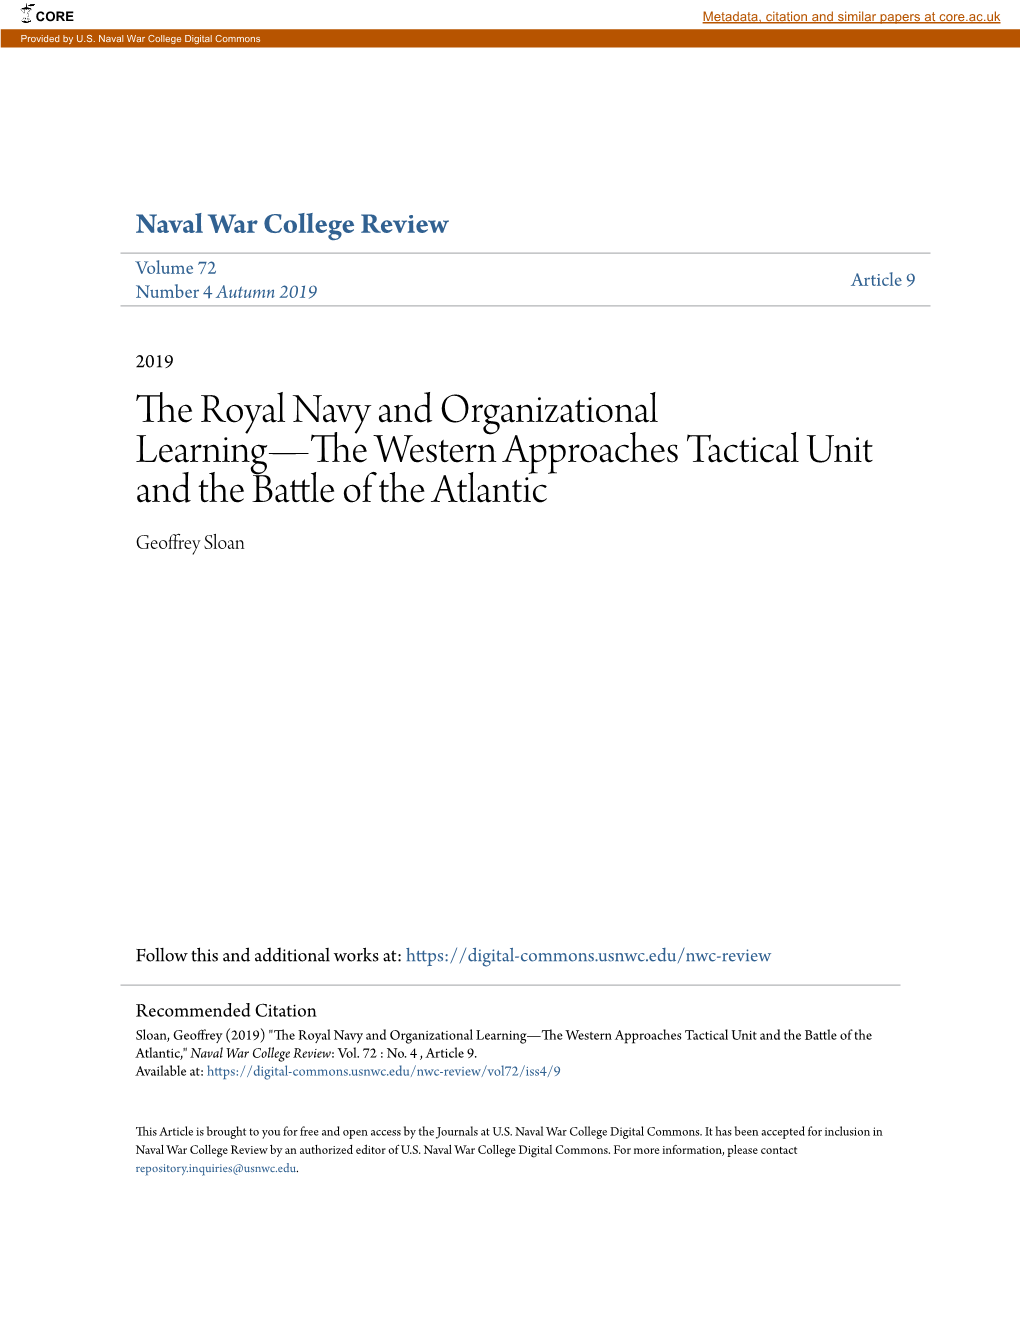 The Royal Navy and Organizational Learning—The Western Approaches